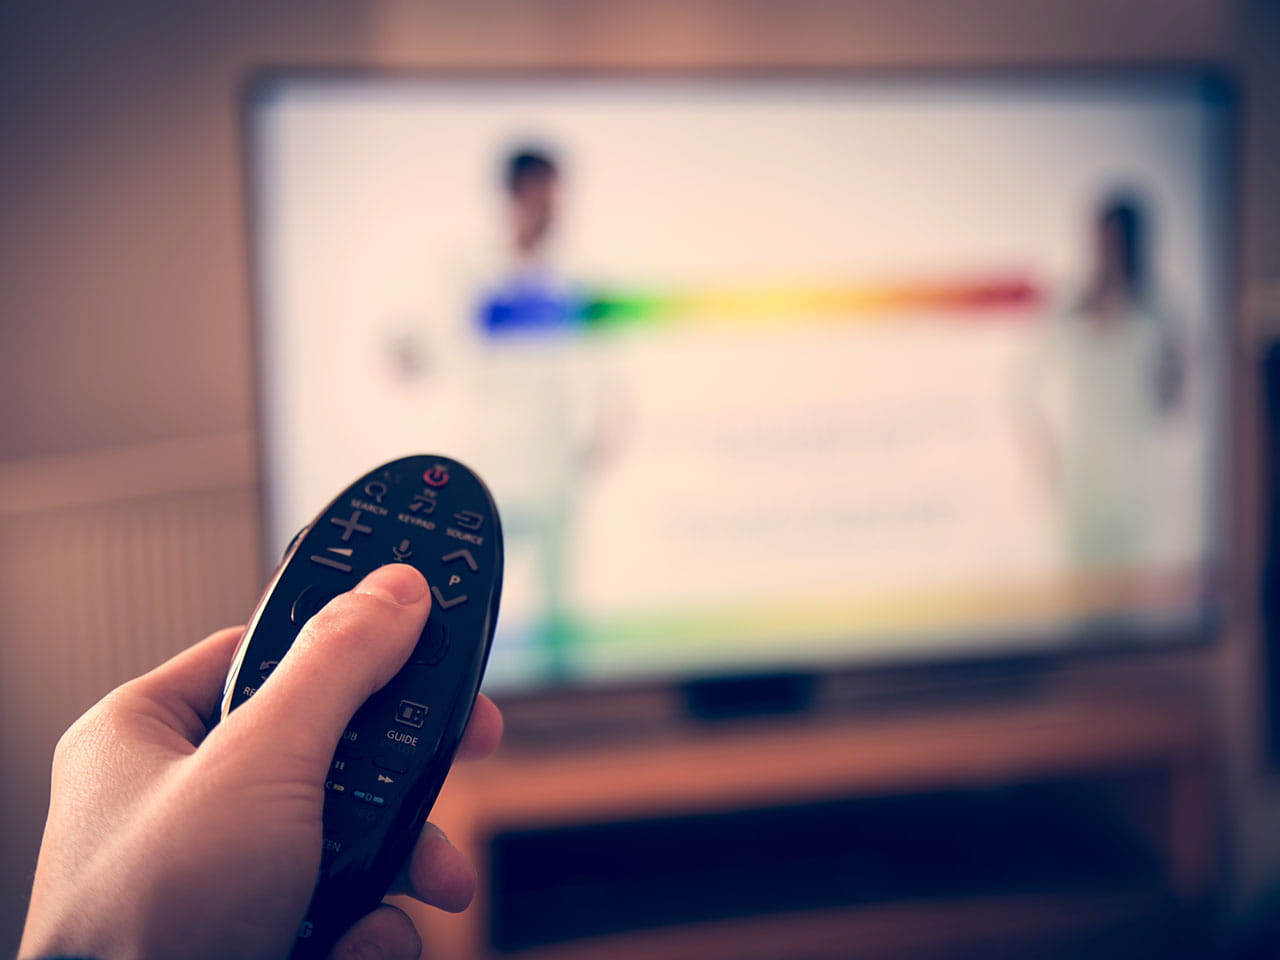 Remote control being used with TV in the background